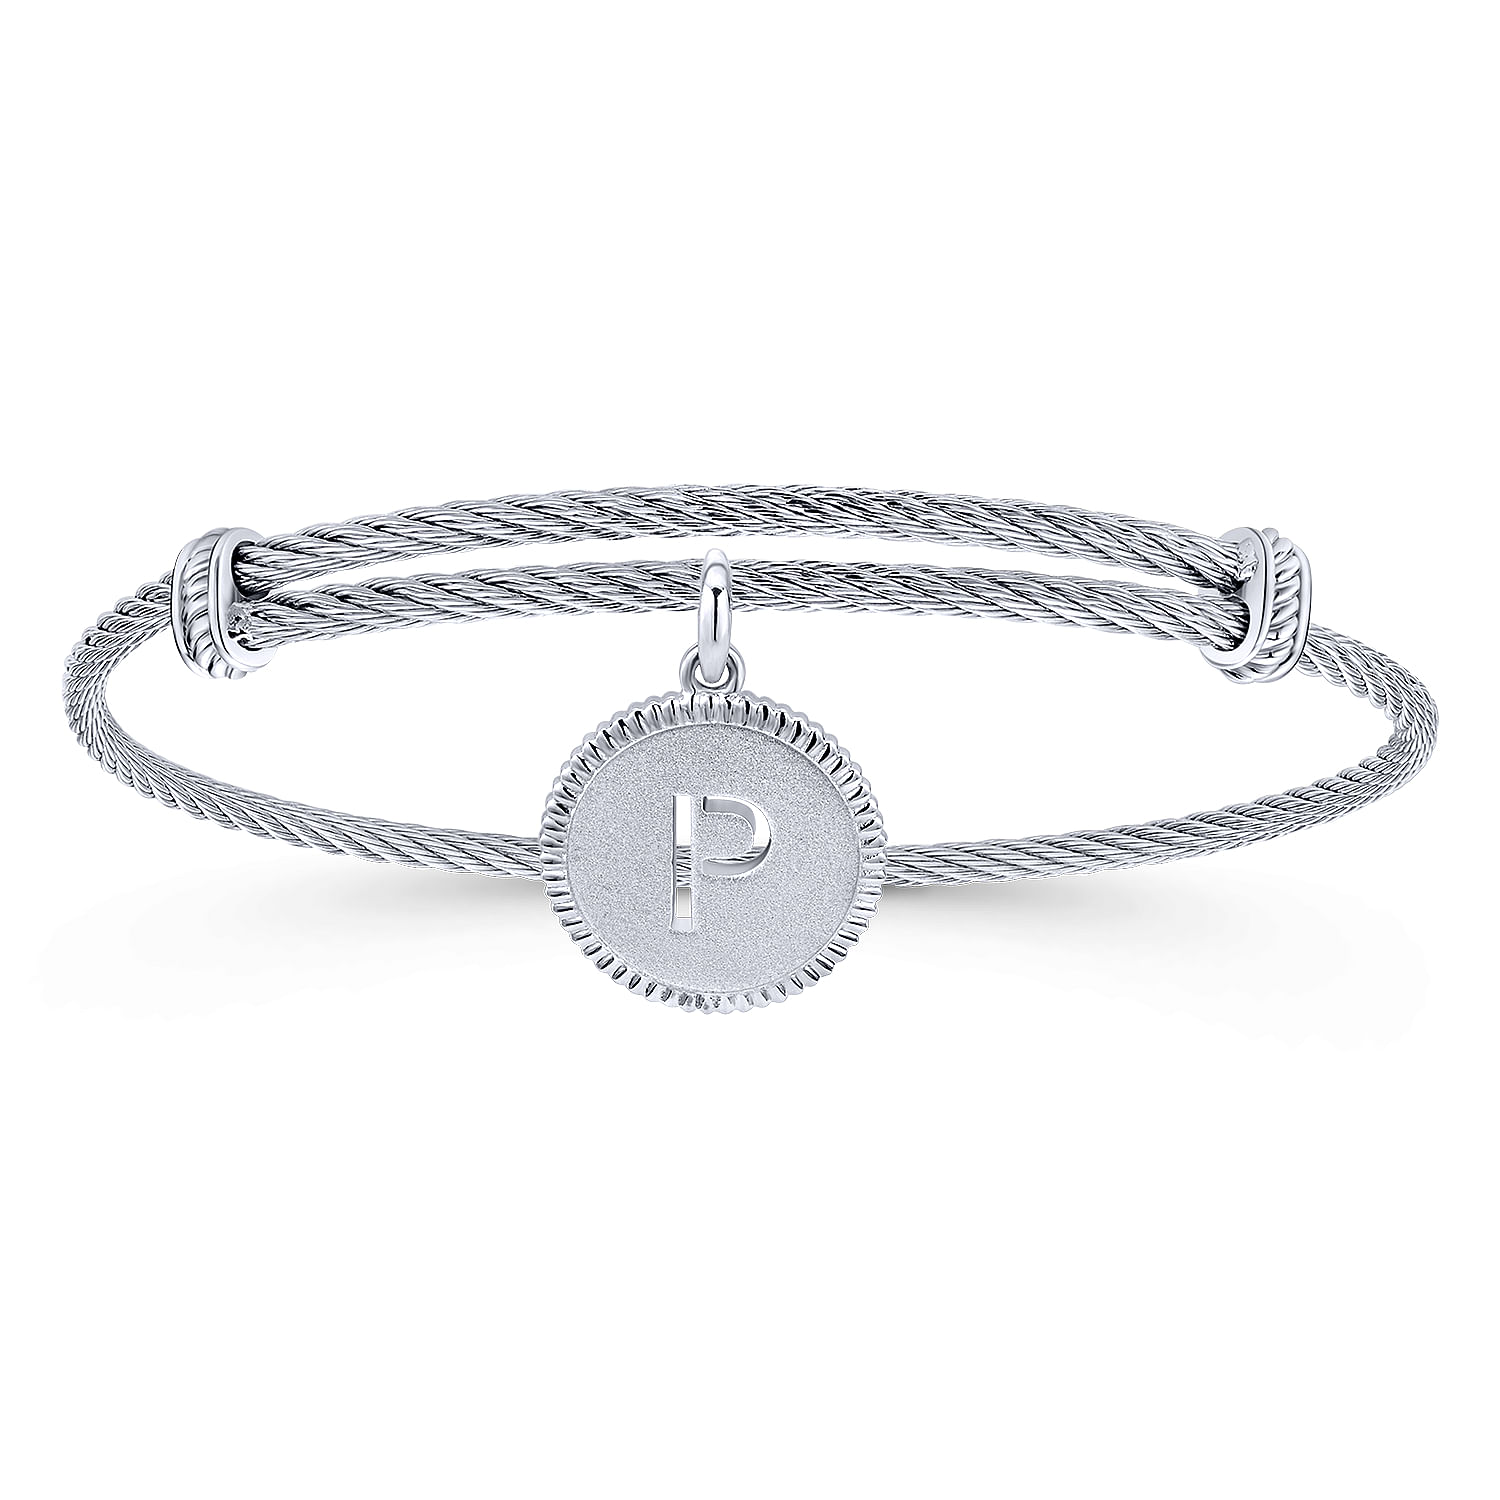 Adjustable Twisted Cable Stainless Steel Bangle with Sterling Silver P Initial Charm